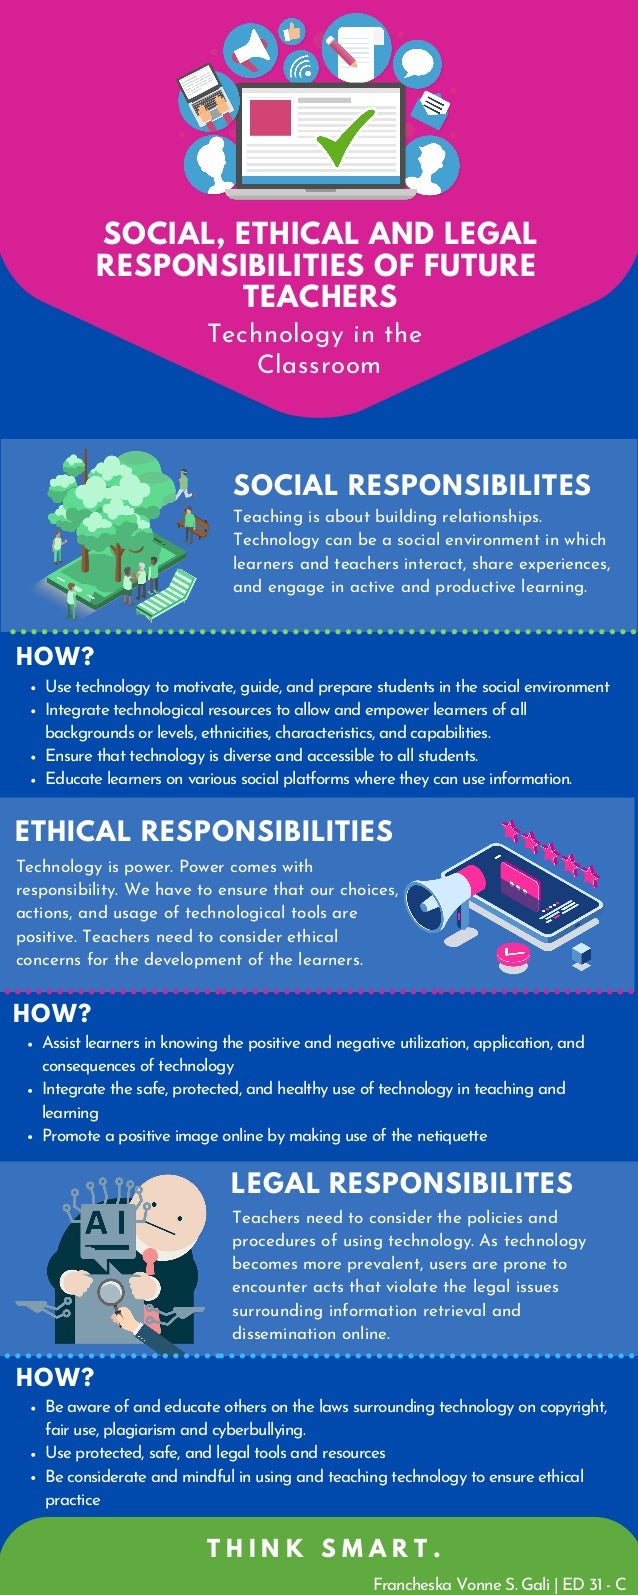 SOCIAL, ETHICAL AND LEGAL
RESPONSIBILITIES OF FUTURE
TEACHERS
Technology in the
Classroom
ETHICAL RESPONSIBILITIES
Technology is power. Power comes with
responsibility. We have to ensure that our choices,
actions, and usage of technological tools are
positive. Teachers need to consider ethical
concerns for the development of the learners.
SOCIAL RESPONSIBILITES
Teaching is about building relationships.
Technology can be a social environment in which
learners and teachers interact, share experiences,
and engage in active and productive learning.
LEGAL RESPONSIBILITES
Teachers need to consider the policies and
procedures of using technology. As technology
becomes more prevalent, users are prone to
encounter acts that violate the legal issues
surrounding information retrieval and
dissemination online.
HOW?
Use technology to motivate, guide, and prepare students in the social environment
Integrate technological resources to allow and empower learners of all
backgrounds or levels, ethnicities, characteristics, and capabilities.
Ensure that technology is diverse and accessible to all students.
Educate learners on various social platforms where they can use information.
HOW?
Assist learners in knowing the positive and negative utilization, application, and
consequences of technology
Integrate the safe, protected, and healthy use of technology in teaching and
learning
Promote a positive image online by making use of the netiquette
HOW?
Be aware of and educate others on the laws surrounding technology on copyright,
fair use, plagiarism and cyberbullying.
Use protected, safe, and legal tools and resources
Be considerate and mindful in using and teaching technology to ensure ethical
practice
T H I N K S M A R T .
Francheska Vonne S. Gali | ED 31 - C
 